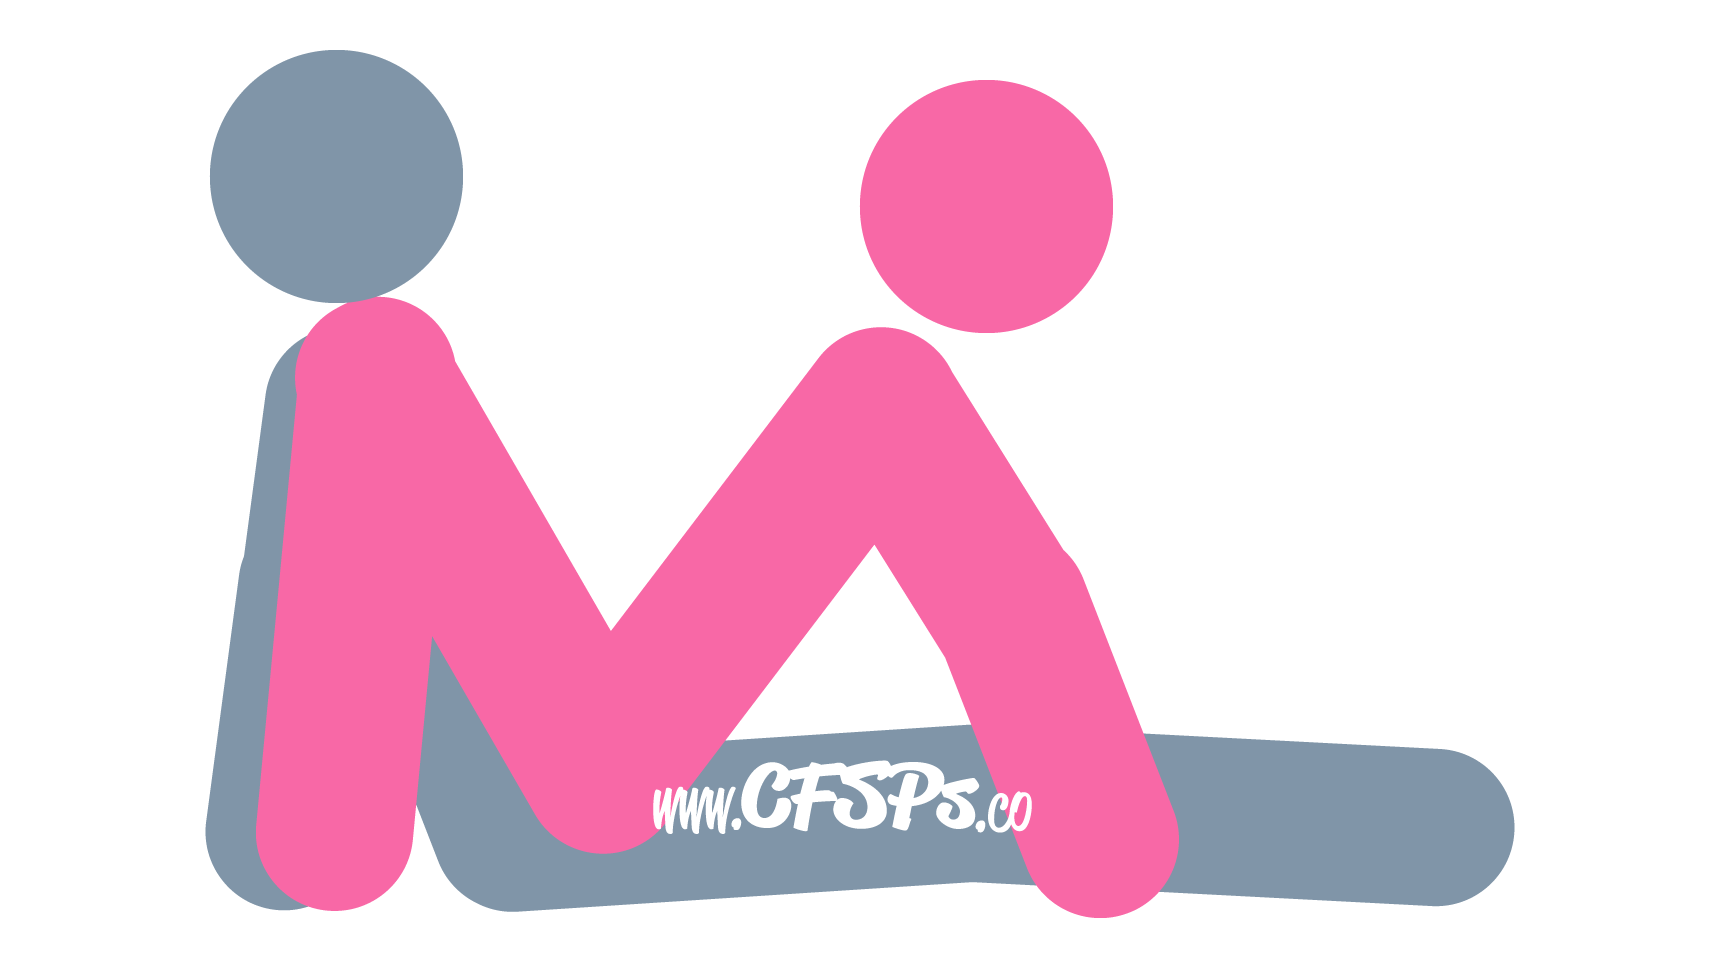 This stick figure image depicts a man and woman having sex in the See-Saw sex position. The man is sitting with his legs straight out, and he's supporting his upper body with his arms behind him. The woman is straddling his pelvis while facing him. Her feet are on the bed next to his hands; she's leaning back, and her hands support her body on the bed near his feet. She's using her feet and arms to hover her pelvis over his.